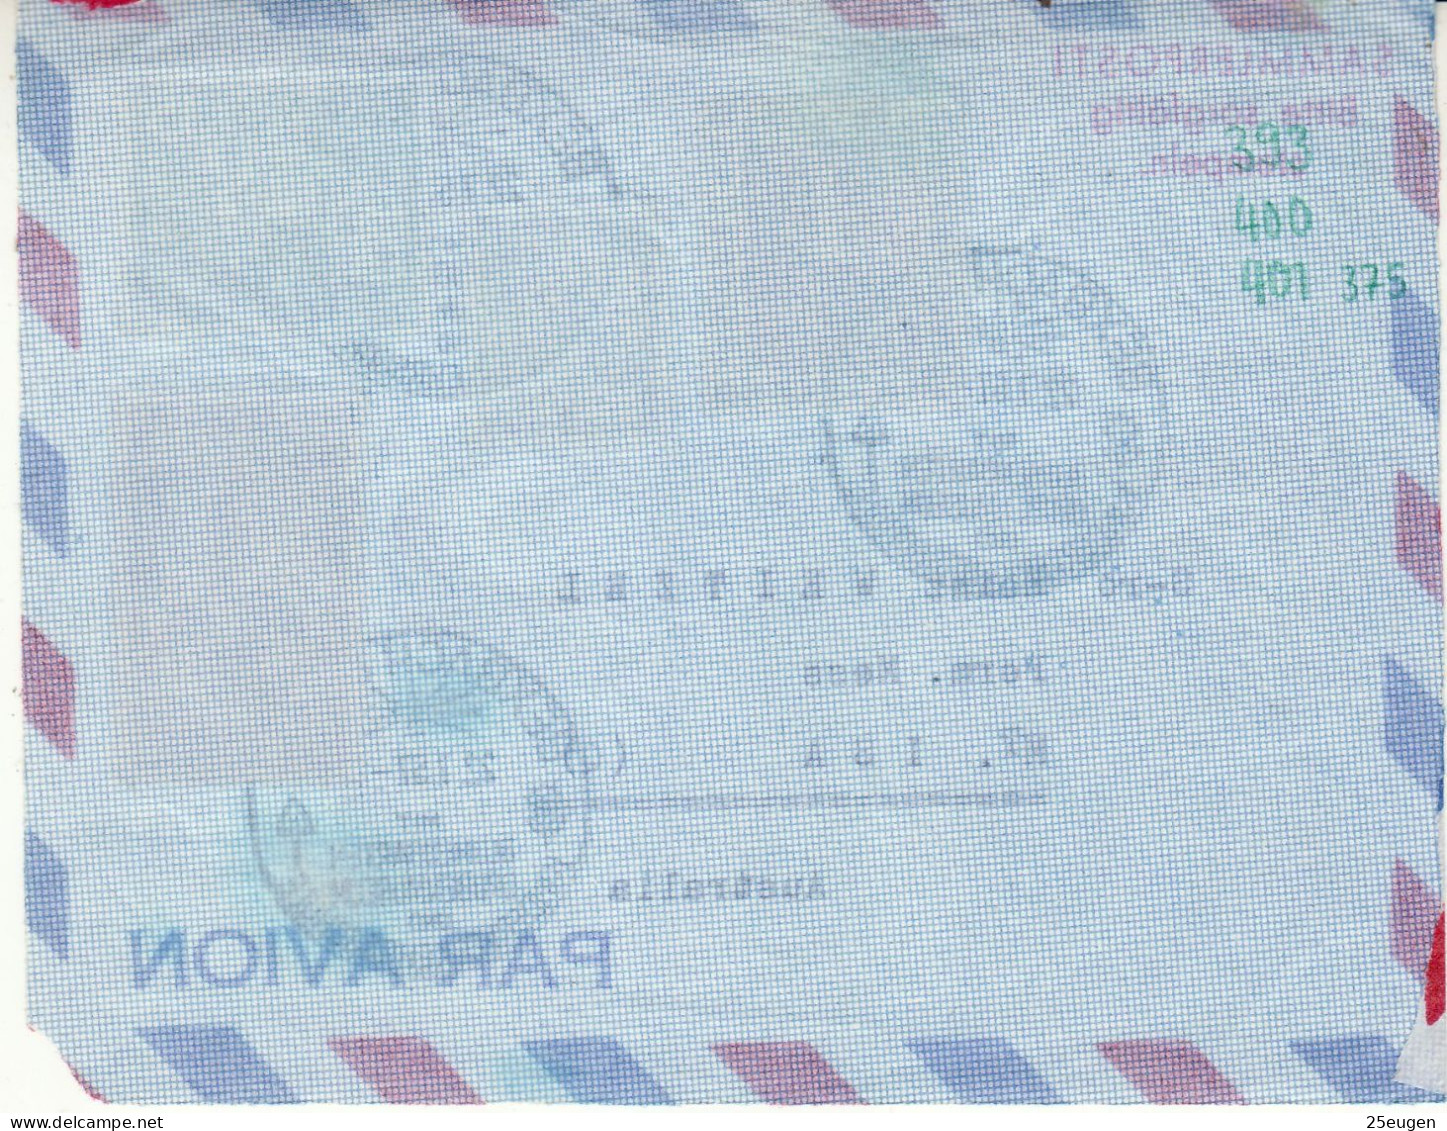 SAAR 1957  LETTER SENT FROM BEXBACH TO Mt.ISA AUSTRALIA /PIECE OF COVER/ - Cartas & Documentos